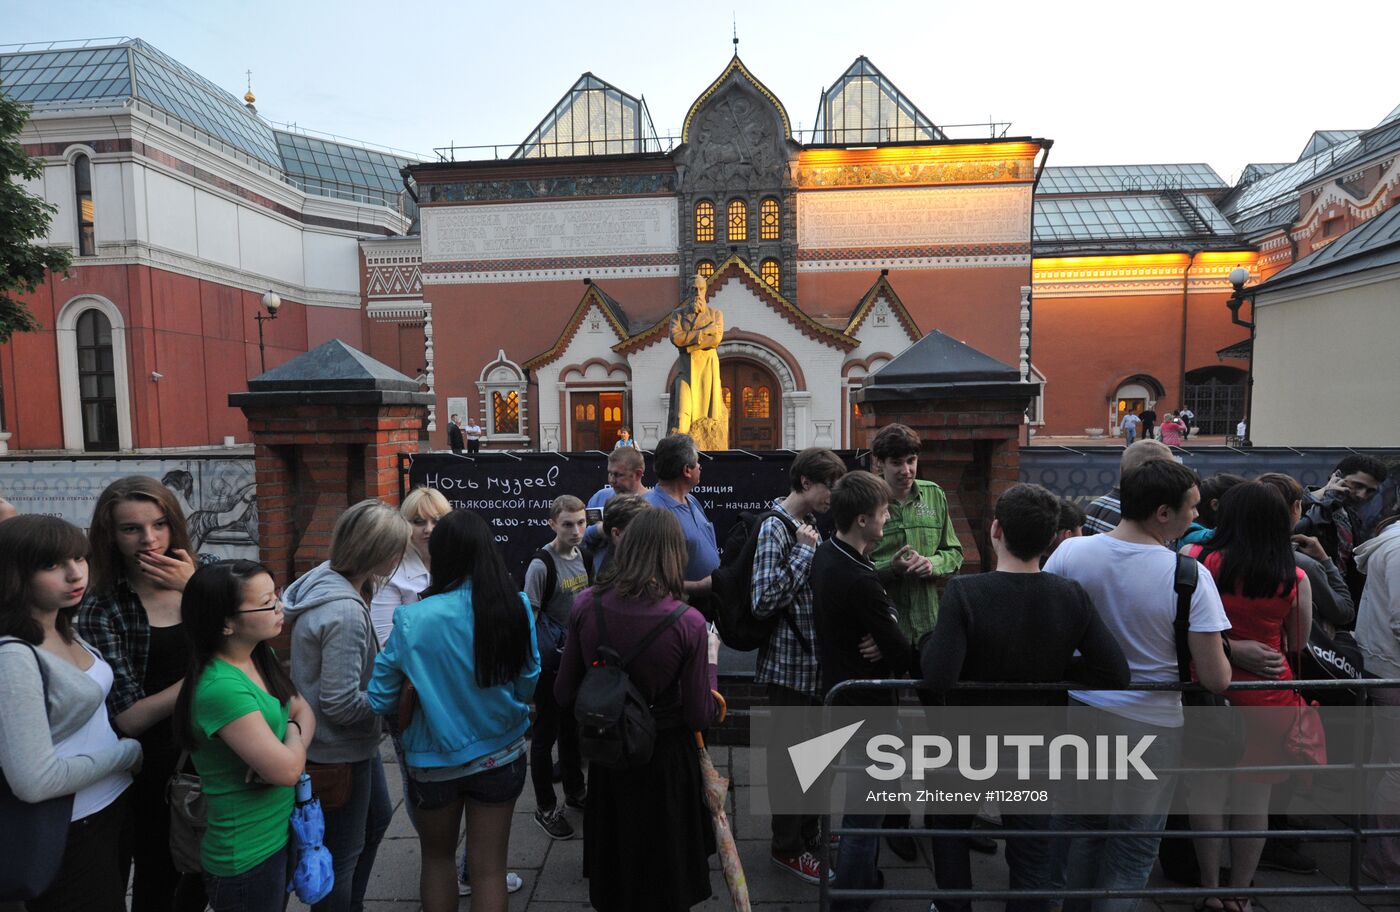 Museum Night festival in Moscow